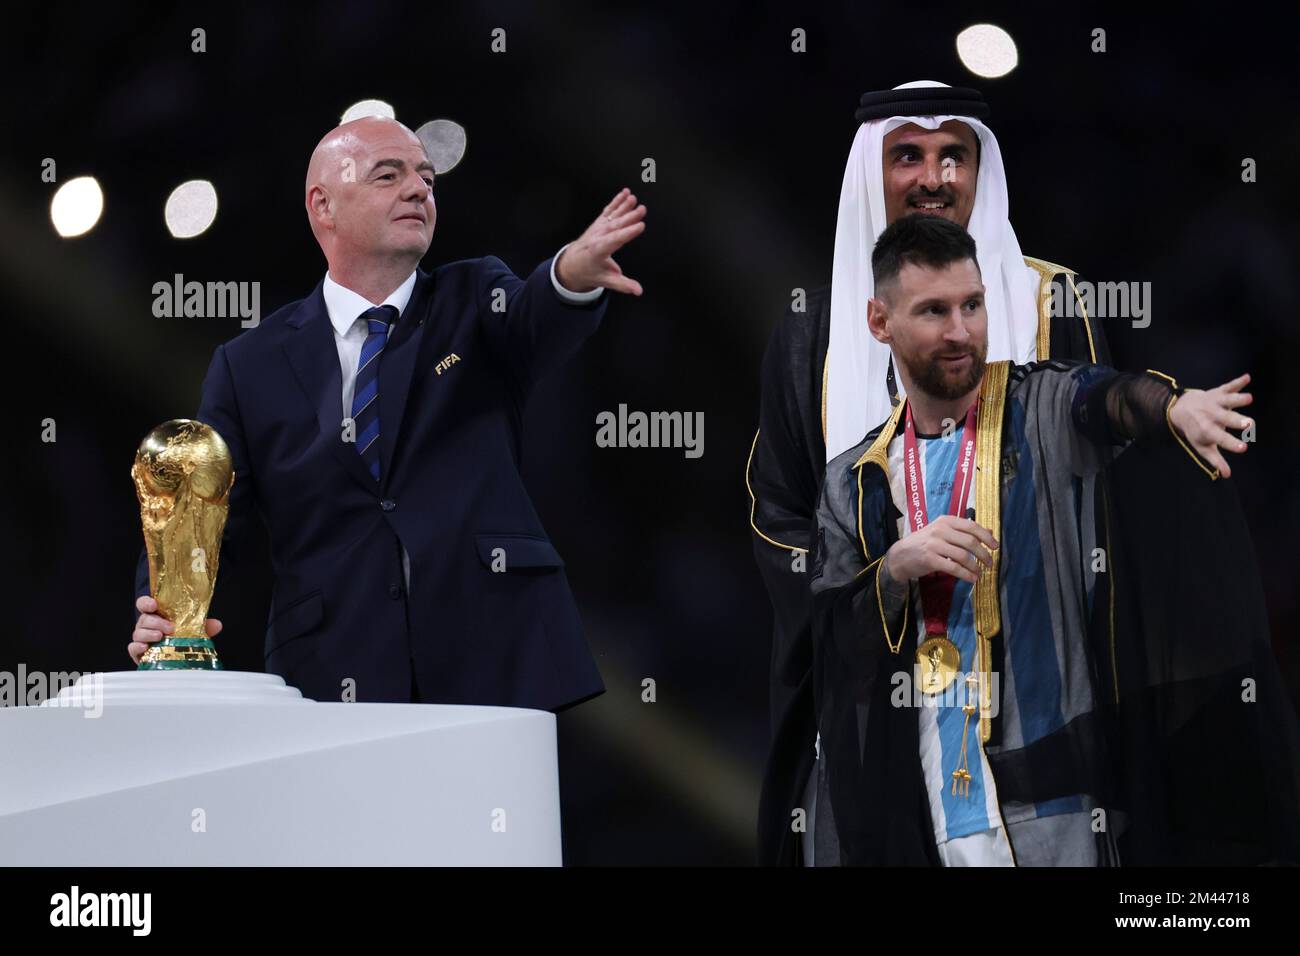 Lusaier, Qatar. 18th Dec, 2022. FIFA President Gianni Infantino (L) and The Emir of Qatar Sheikh Tamim bin Hamad Al Thani (C) and Lionel Messi of Argentina gesture during the awarding ceremony of the 2022 FIFA World Cup at Lusail Stadium in Lusail, Qatar, Dec. 18, 2022. Credit: Li Ming/Xinhua/Alamy Live News/Alamy Live News Stock Photo